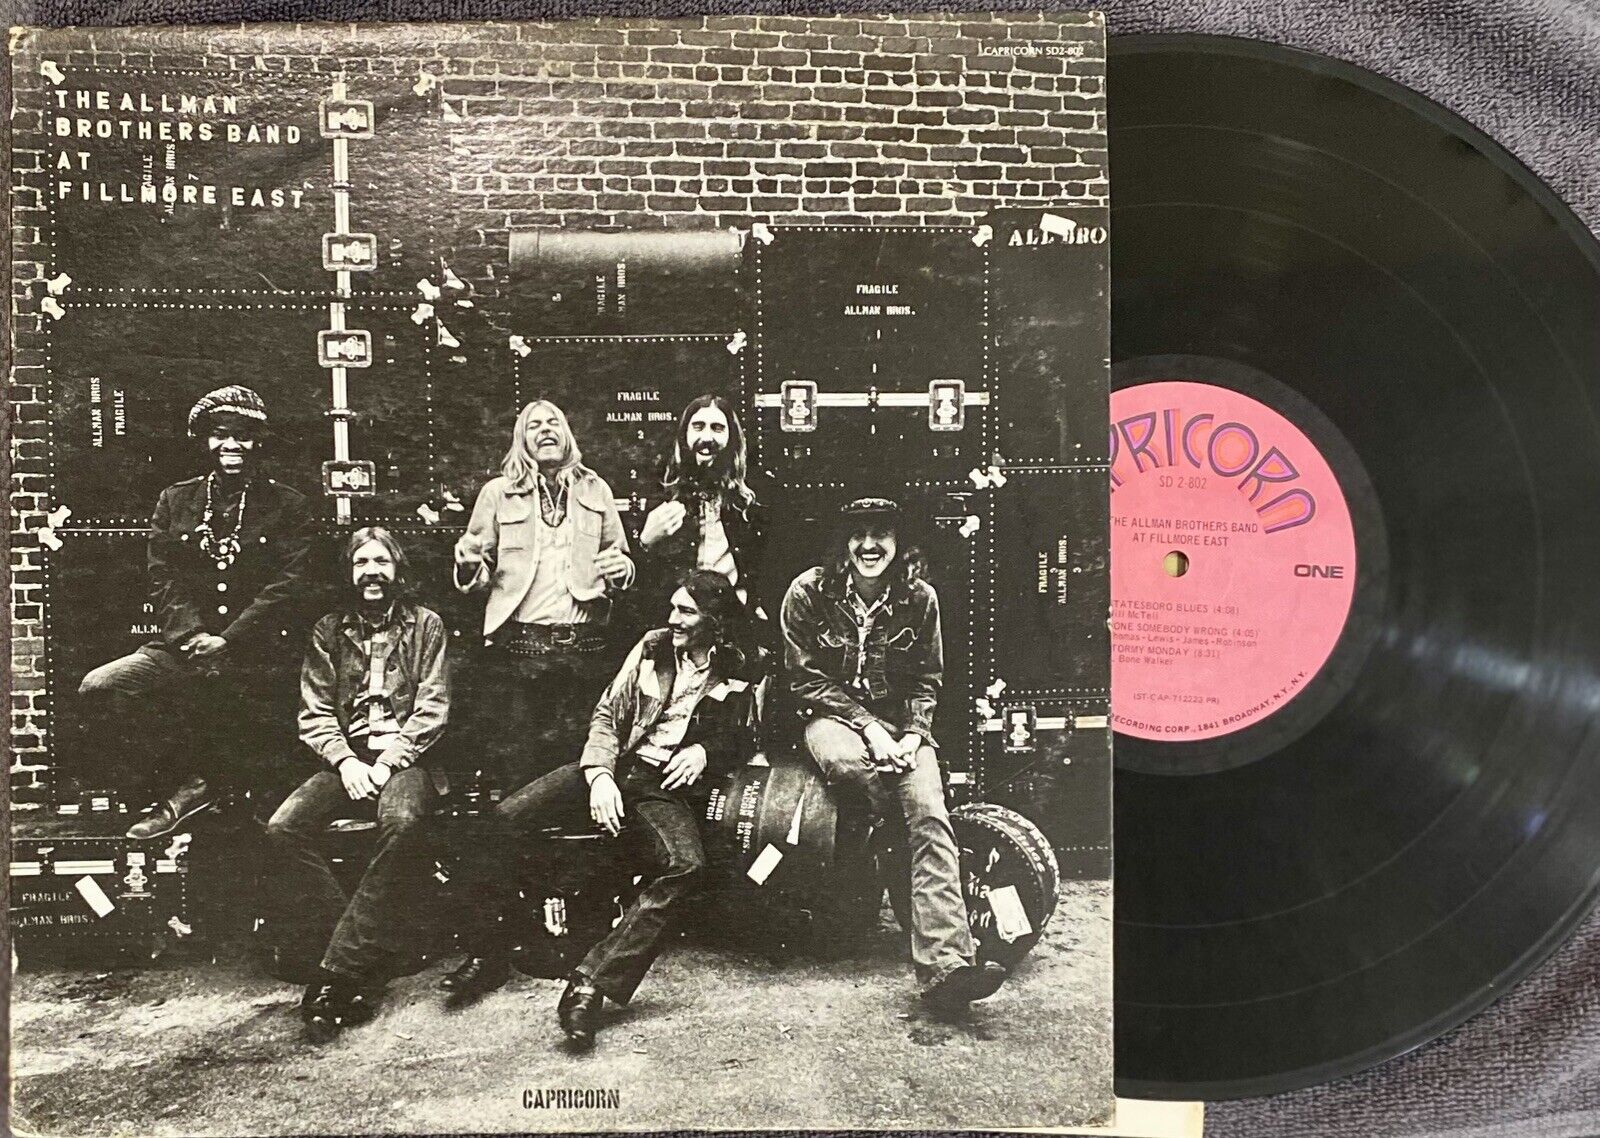 THE ALLMAN BROTHERS BAND “AT FILLMORE EAST” LP 1971 1ST PRESS PINK LABELS VG+